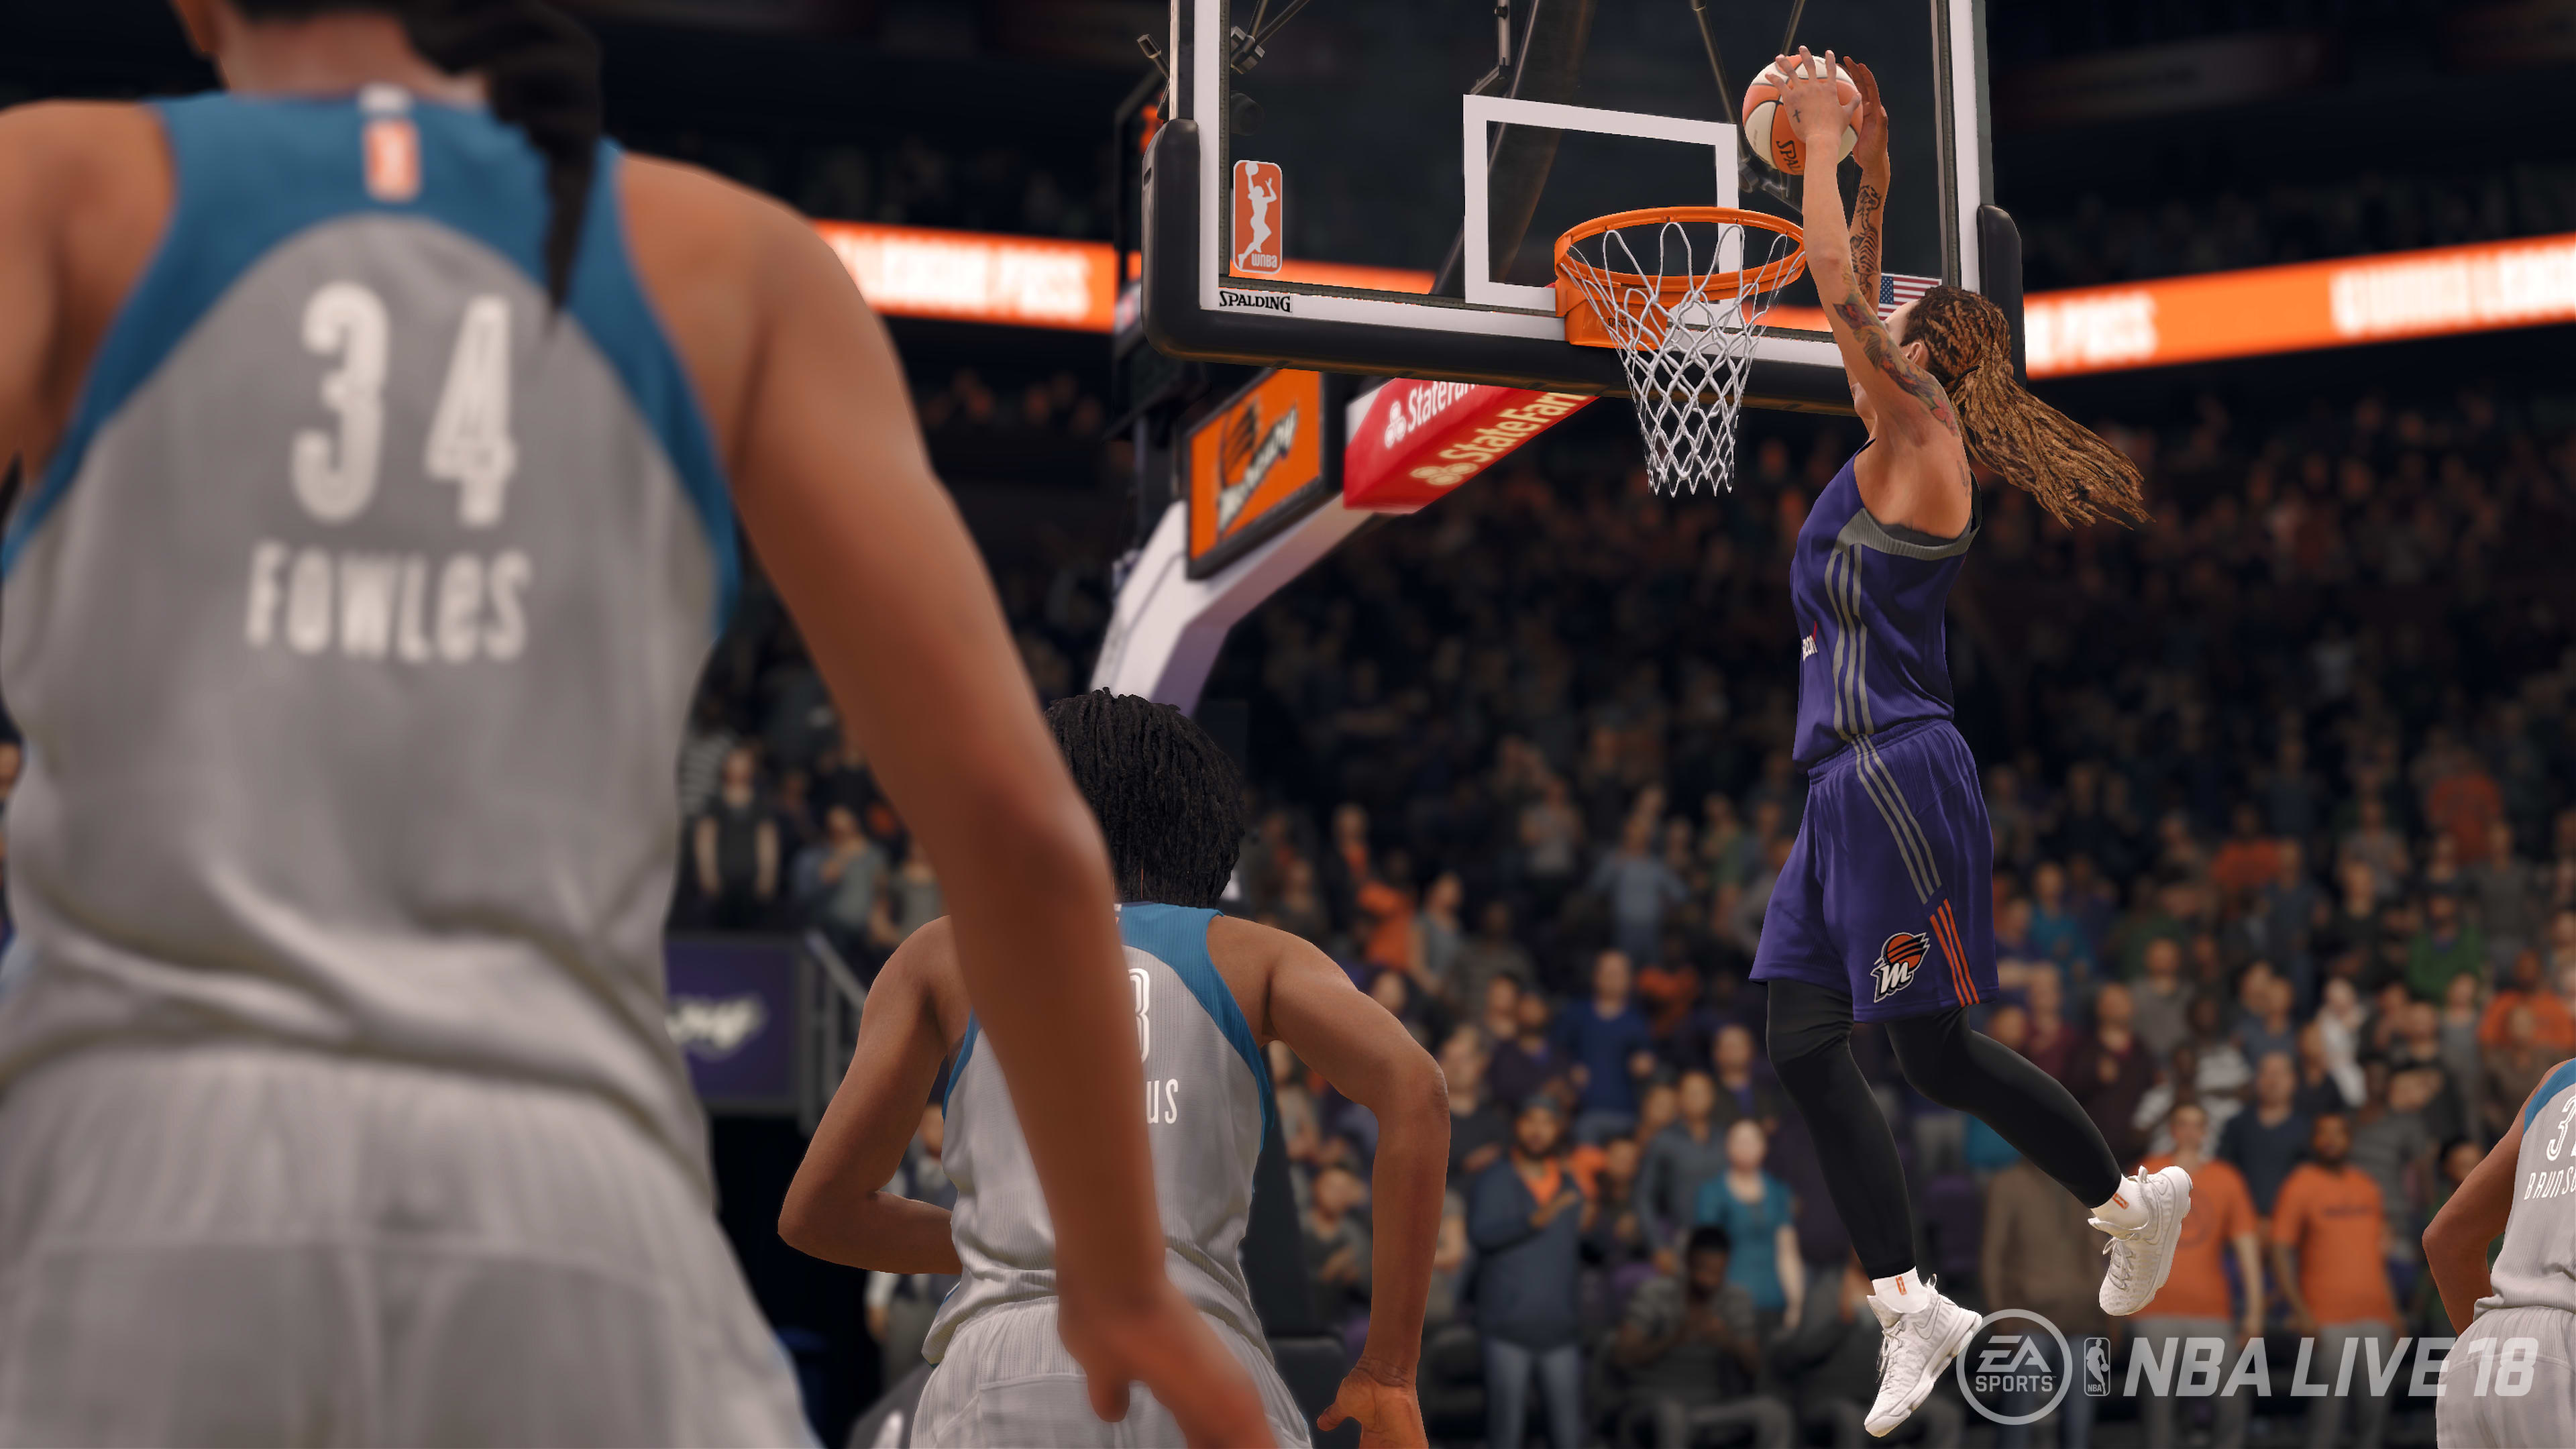 The WNBAs full roster will be included in EAs NBA LIVE 18 video game